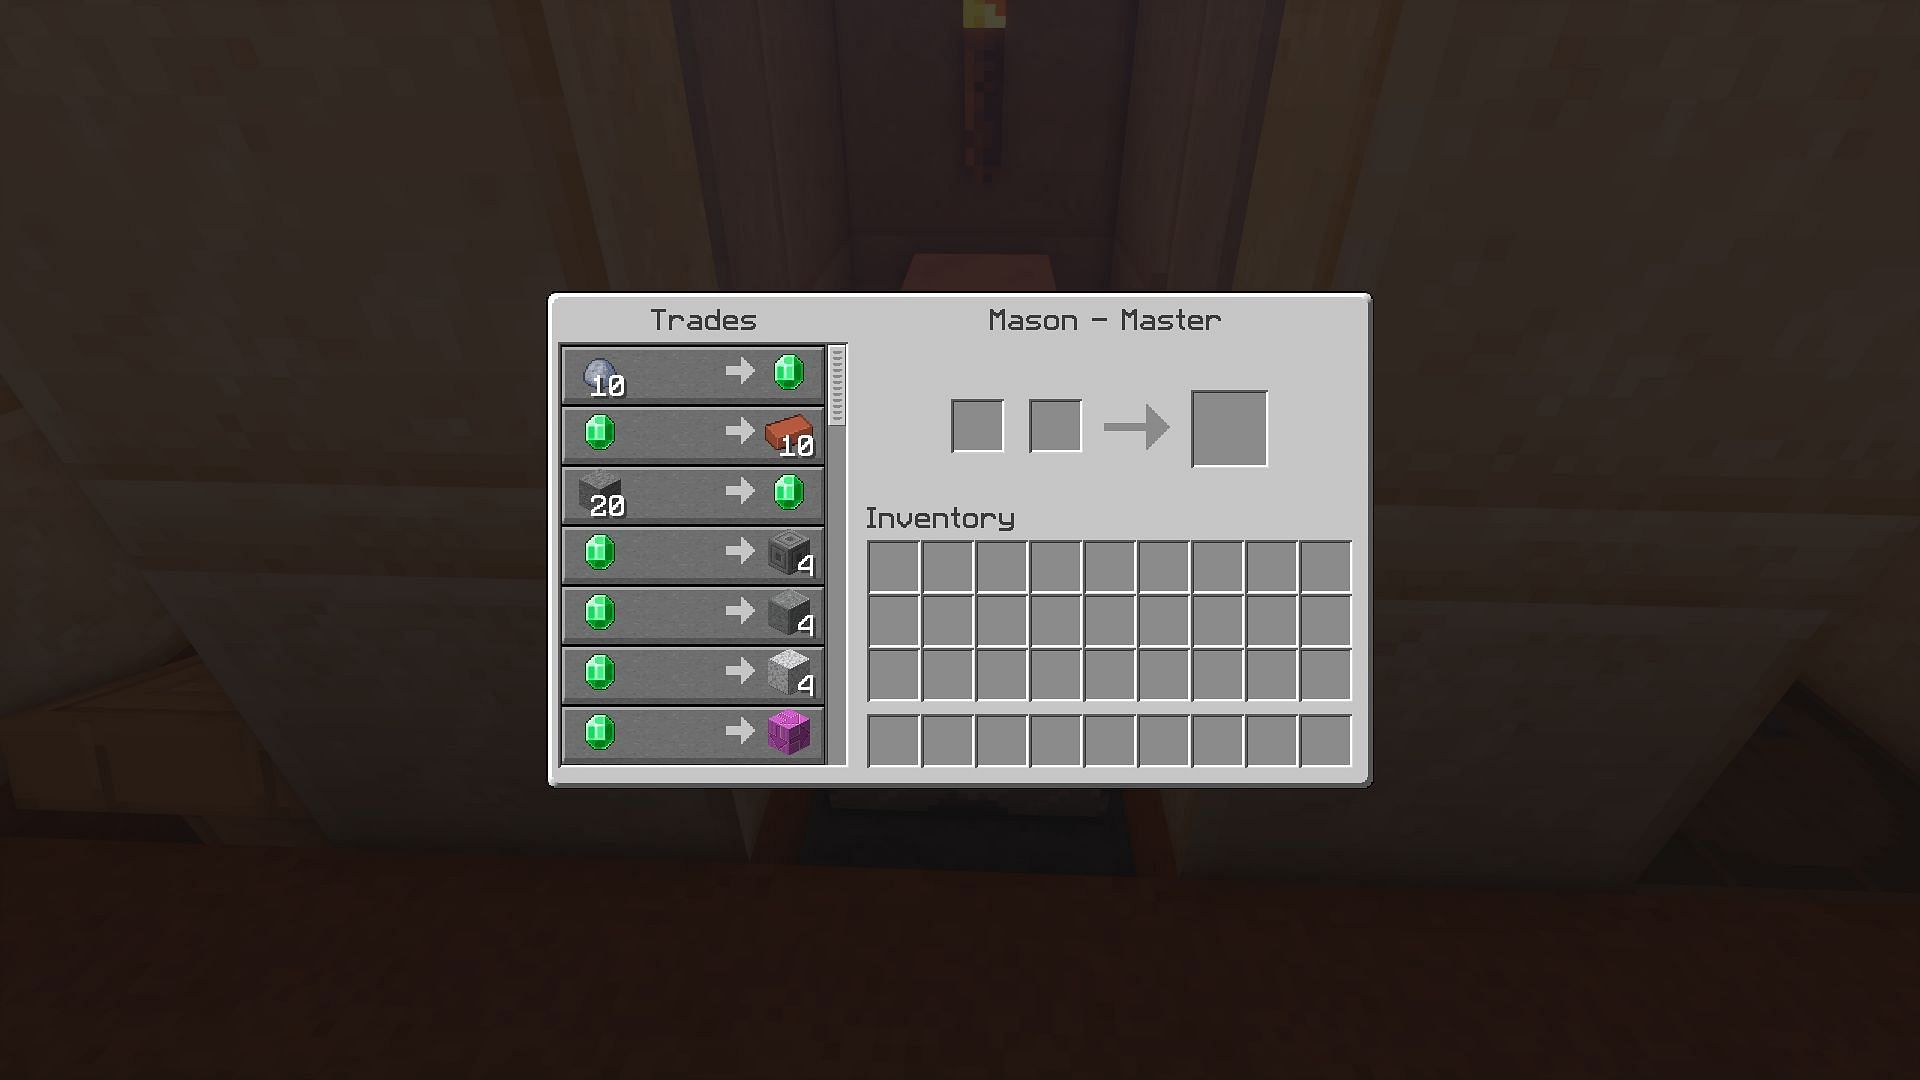 The trades offered by a mason (Image via Minecraft)